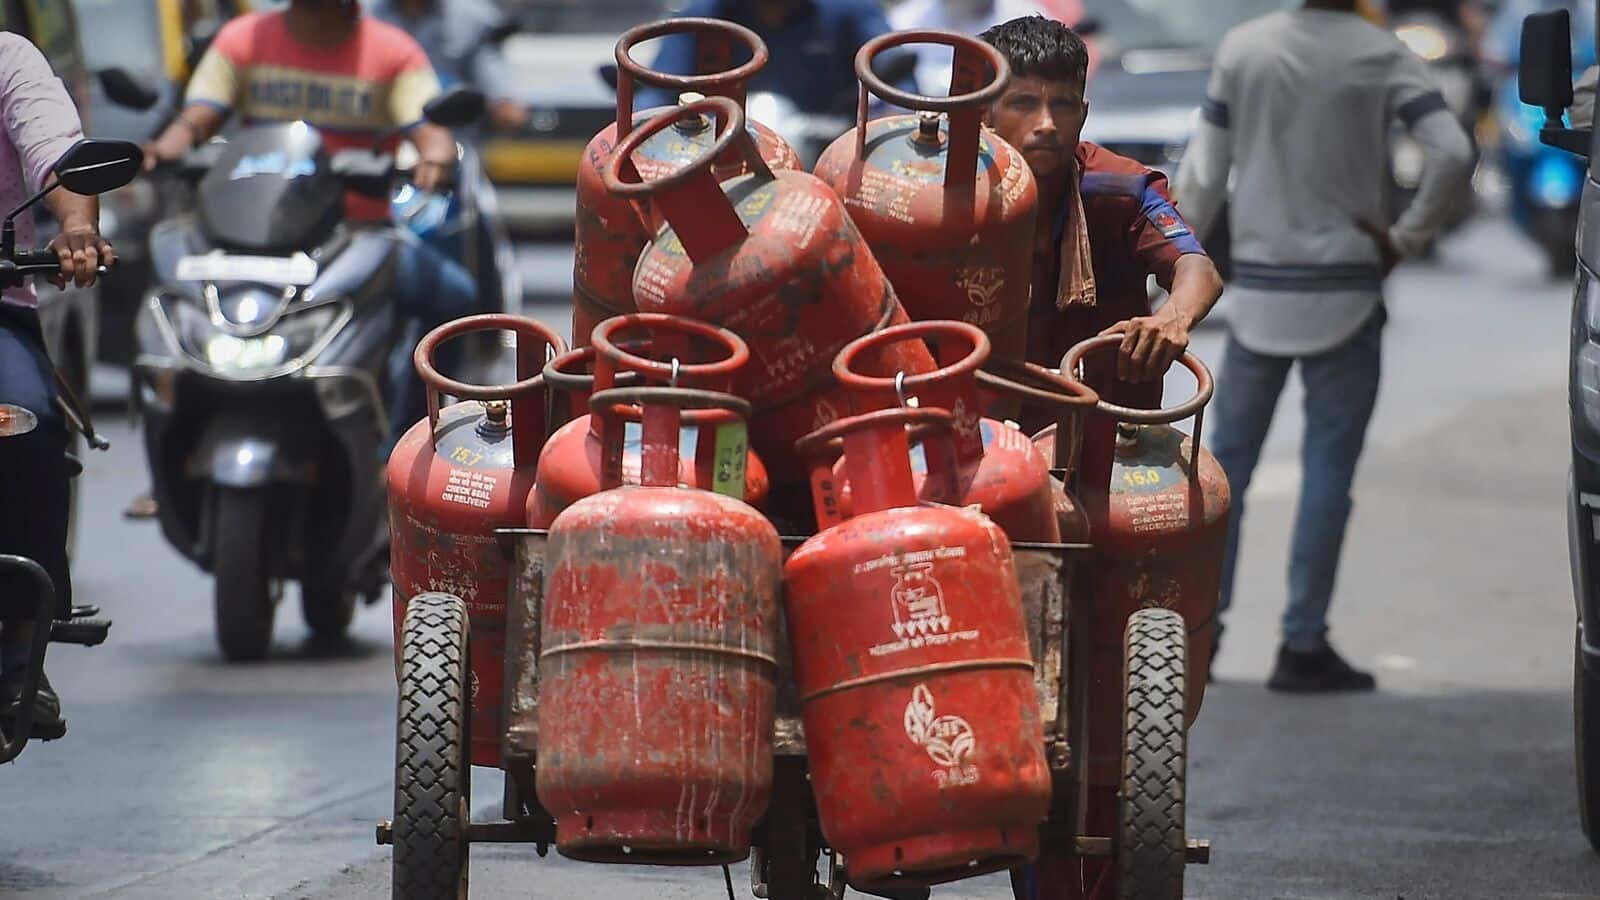 Union Cabinet Approves Substantial Reduction in LPG Prices for Ujjwala Scheme Beneficiaries